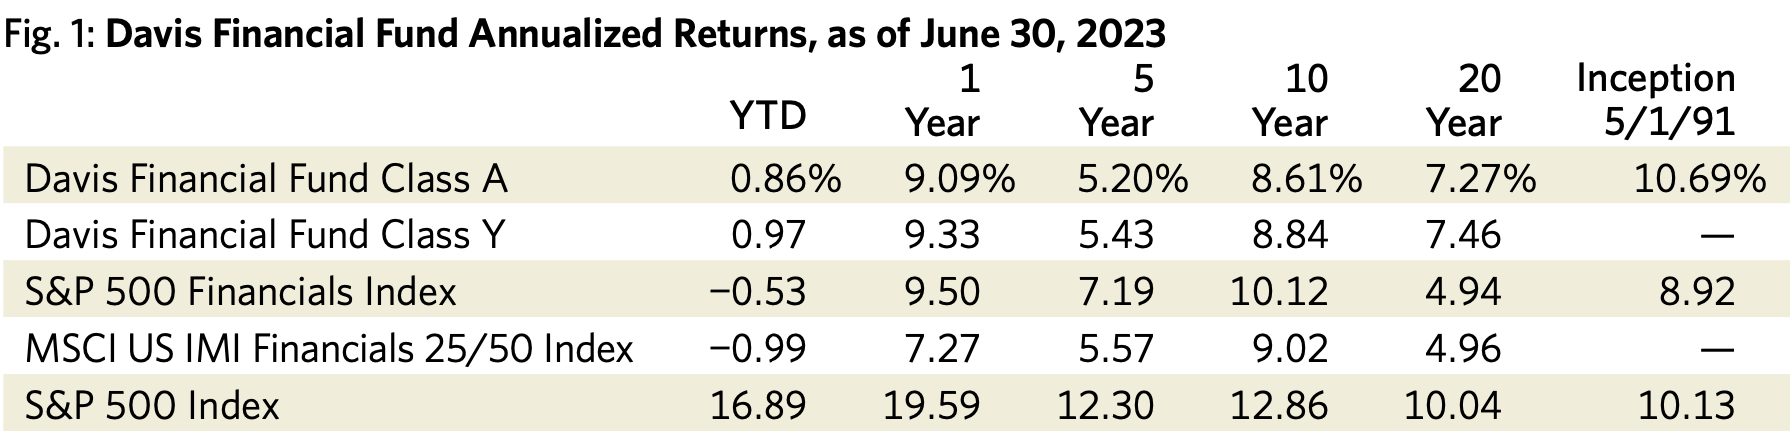 Fig. 1: Davis Financial Fund Annualized Returns, as of June 30, 2023